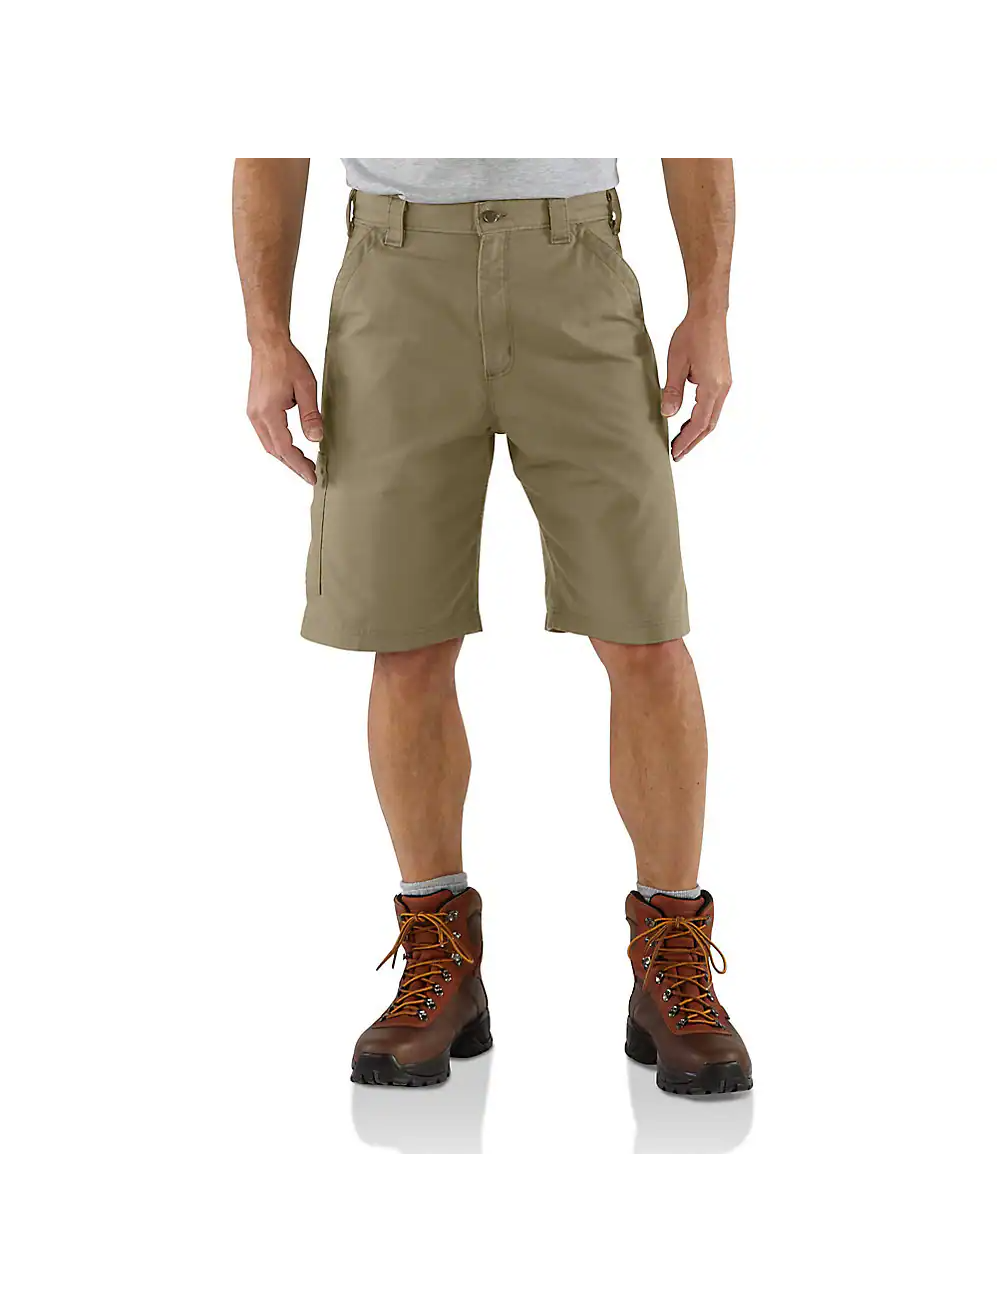 Carhartt Men's Loose Fit Canvas Utility Work Shorts